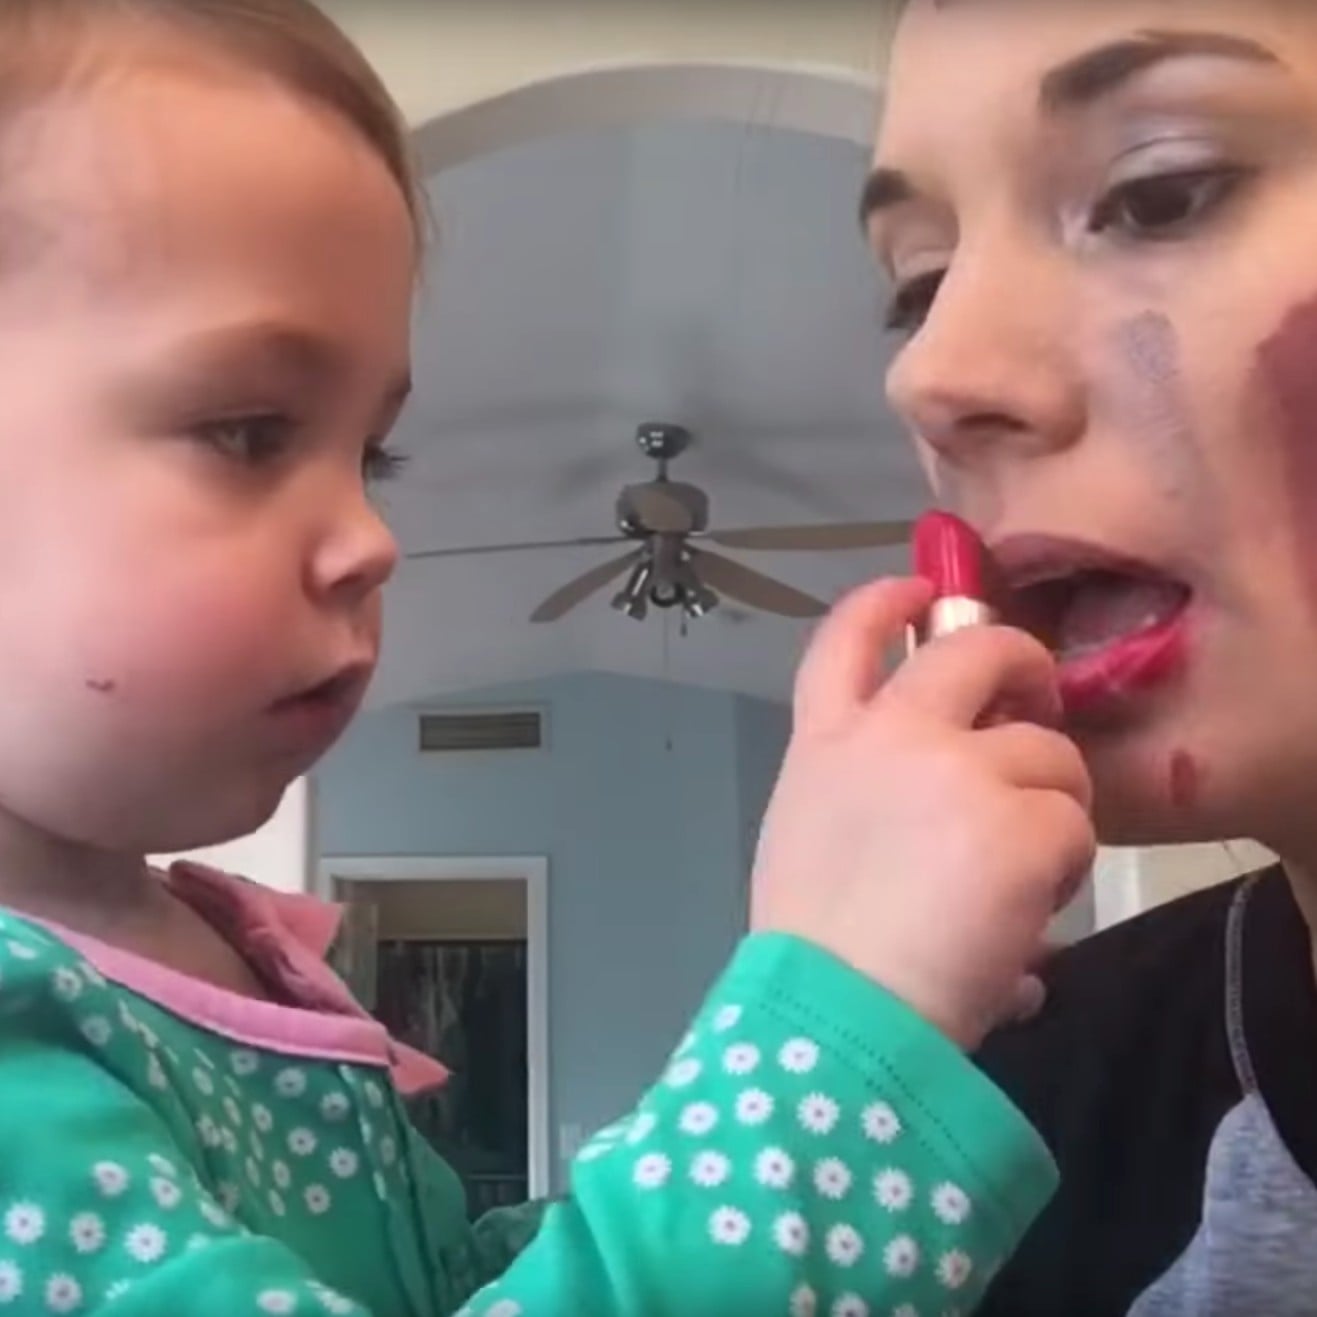 Baby Makeup Tutorial Funny Video | POPSUGAR Middle East Family